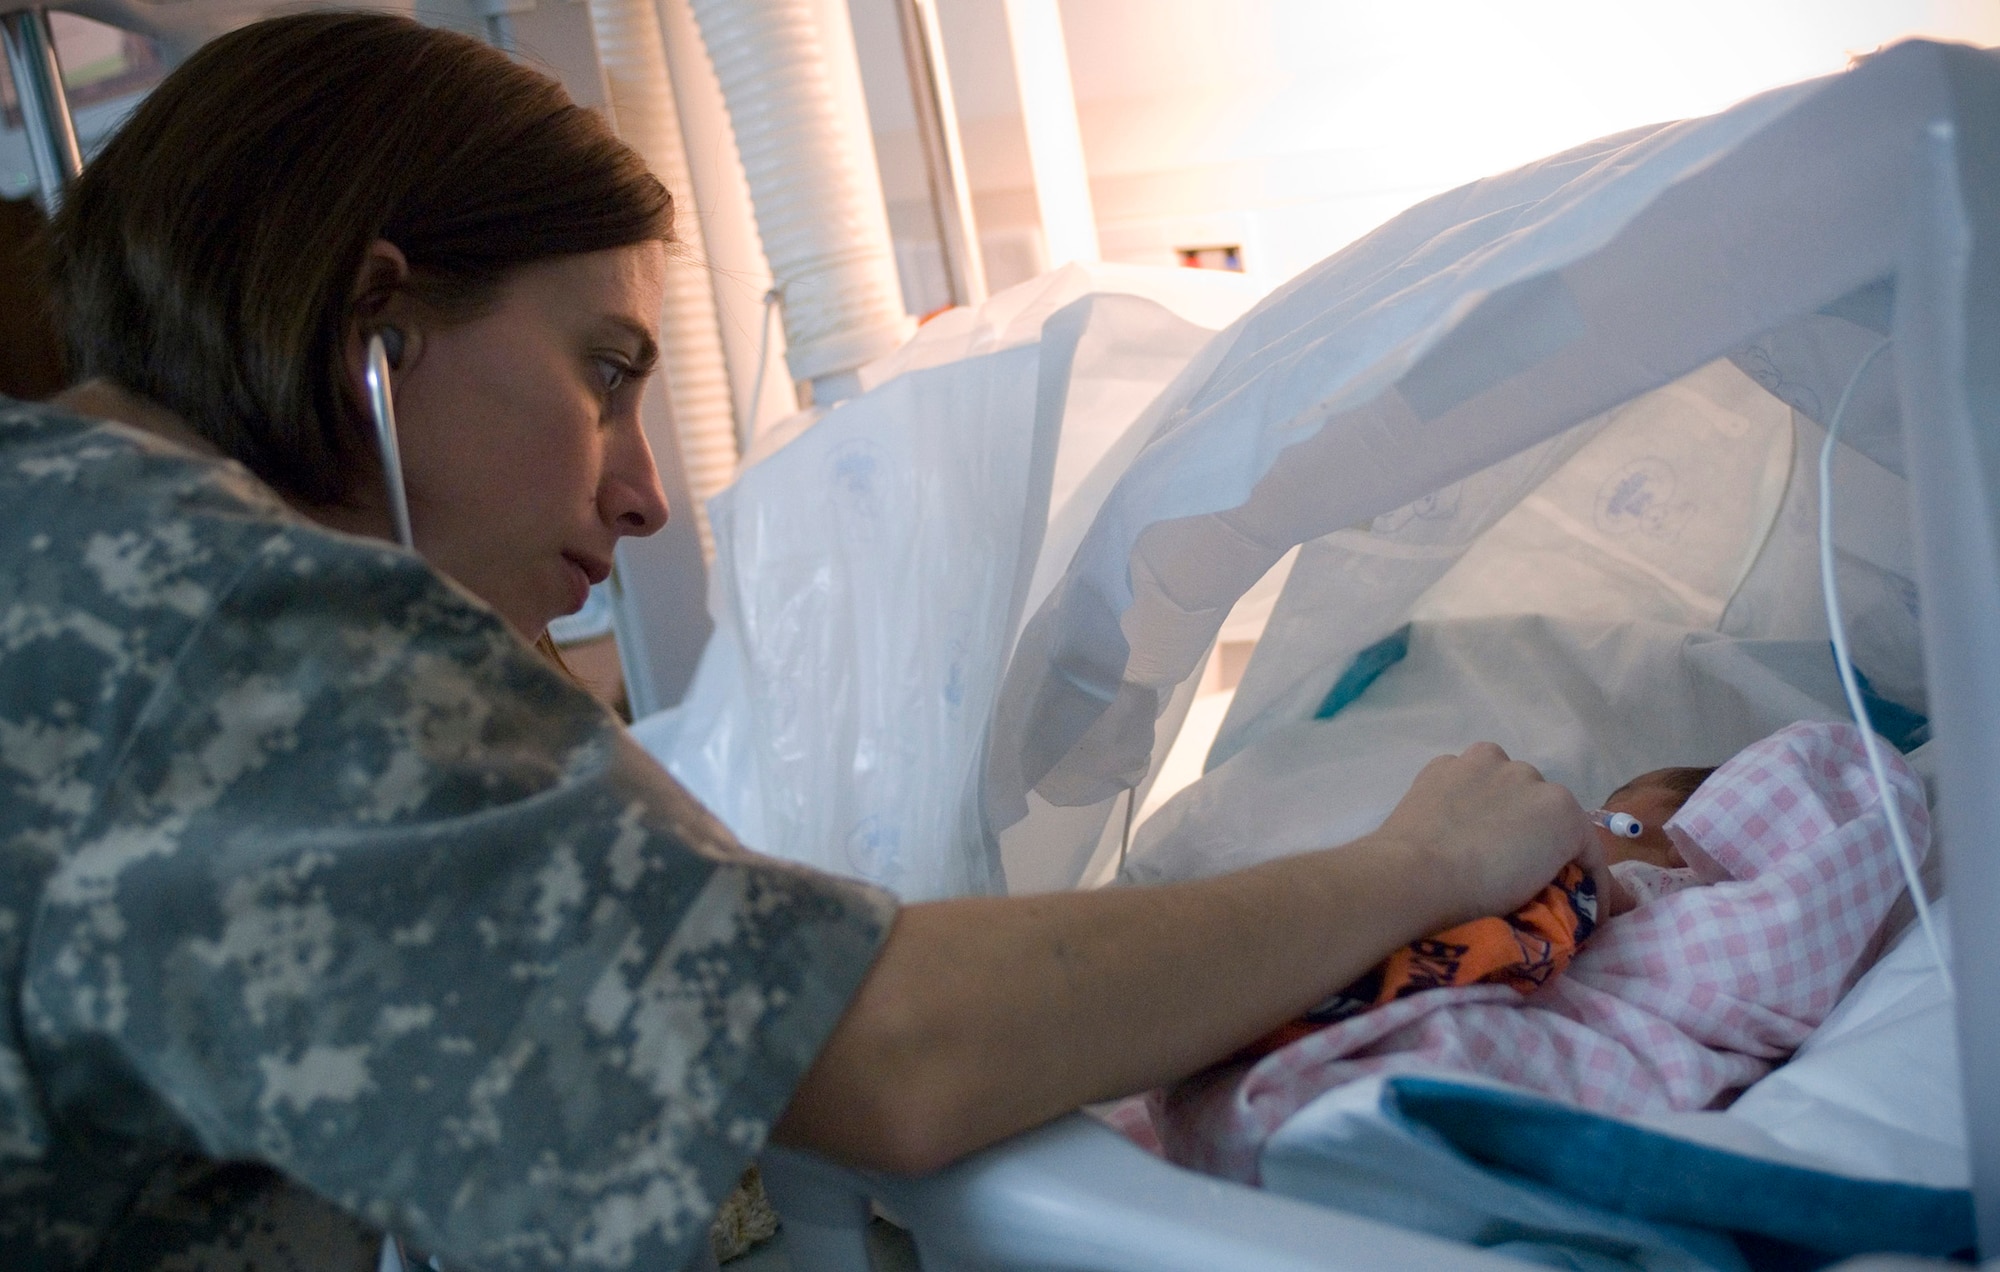 First Lt. Michelle Pierson, an Intensive Care Unit nurse deployed from Travis Air Force Base, Calif., listens to the heartbeat of the first Afghan baby born at the Craig Joint Theater Hospital, Bagram Air Field, Afghanistan, Oct. 6. Without typical neonatal equipment on hand, the hospital staff created a makeshift incubator with a warming blanket and wire hangars. (U.S. Air Force photo by Staff Sgt. Rachel Martinez)